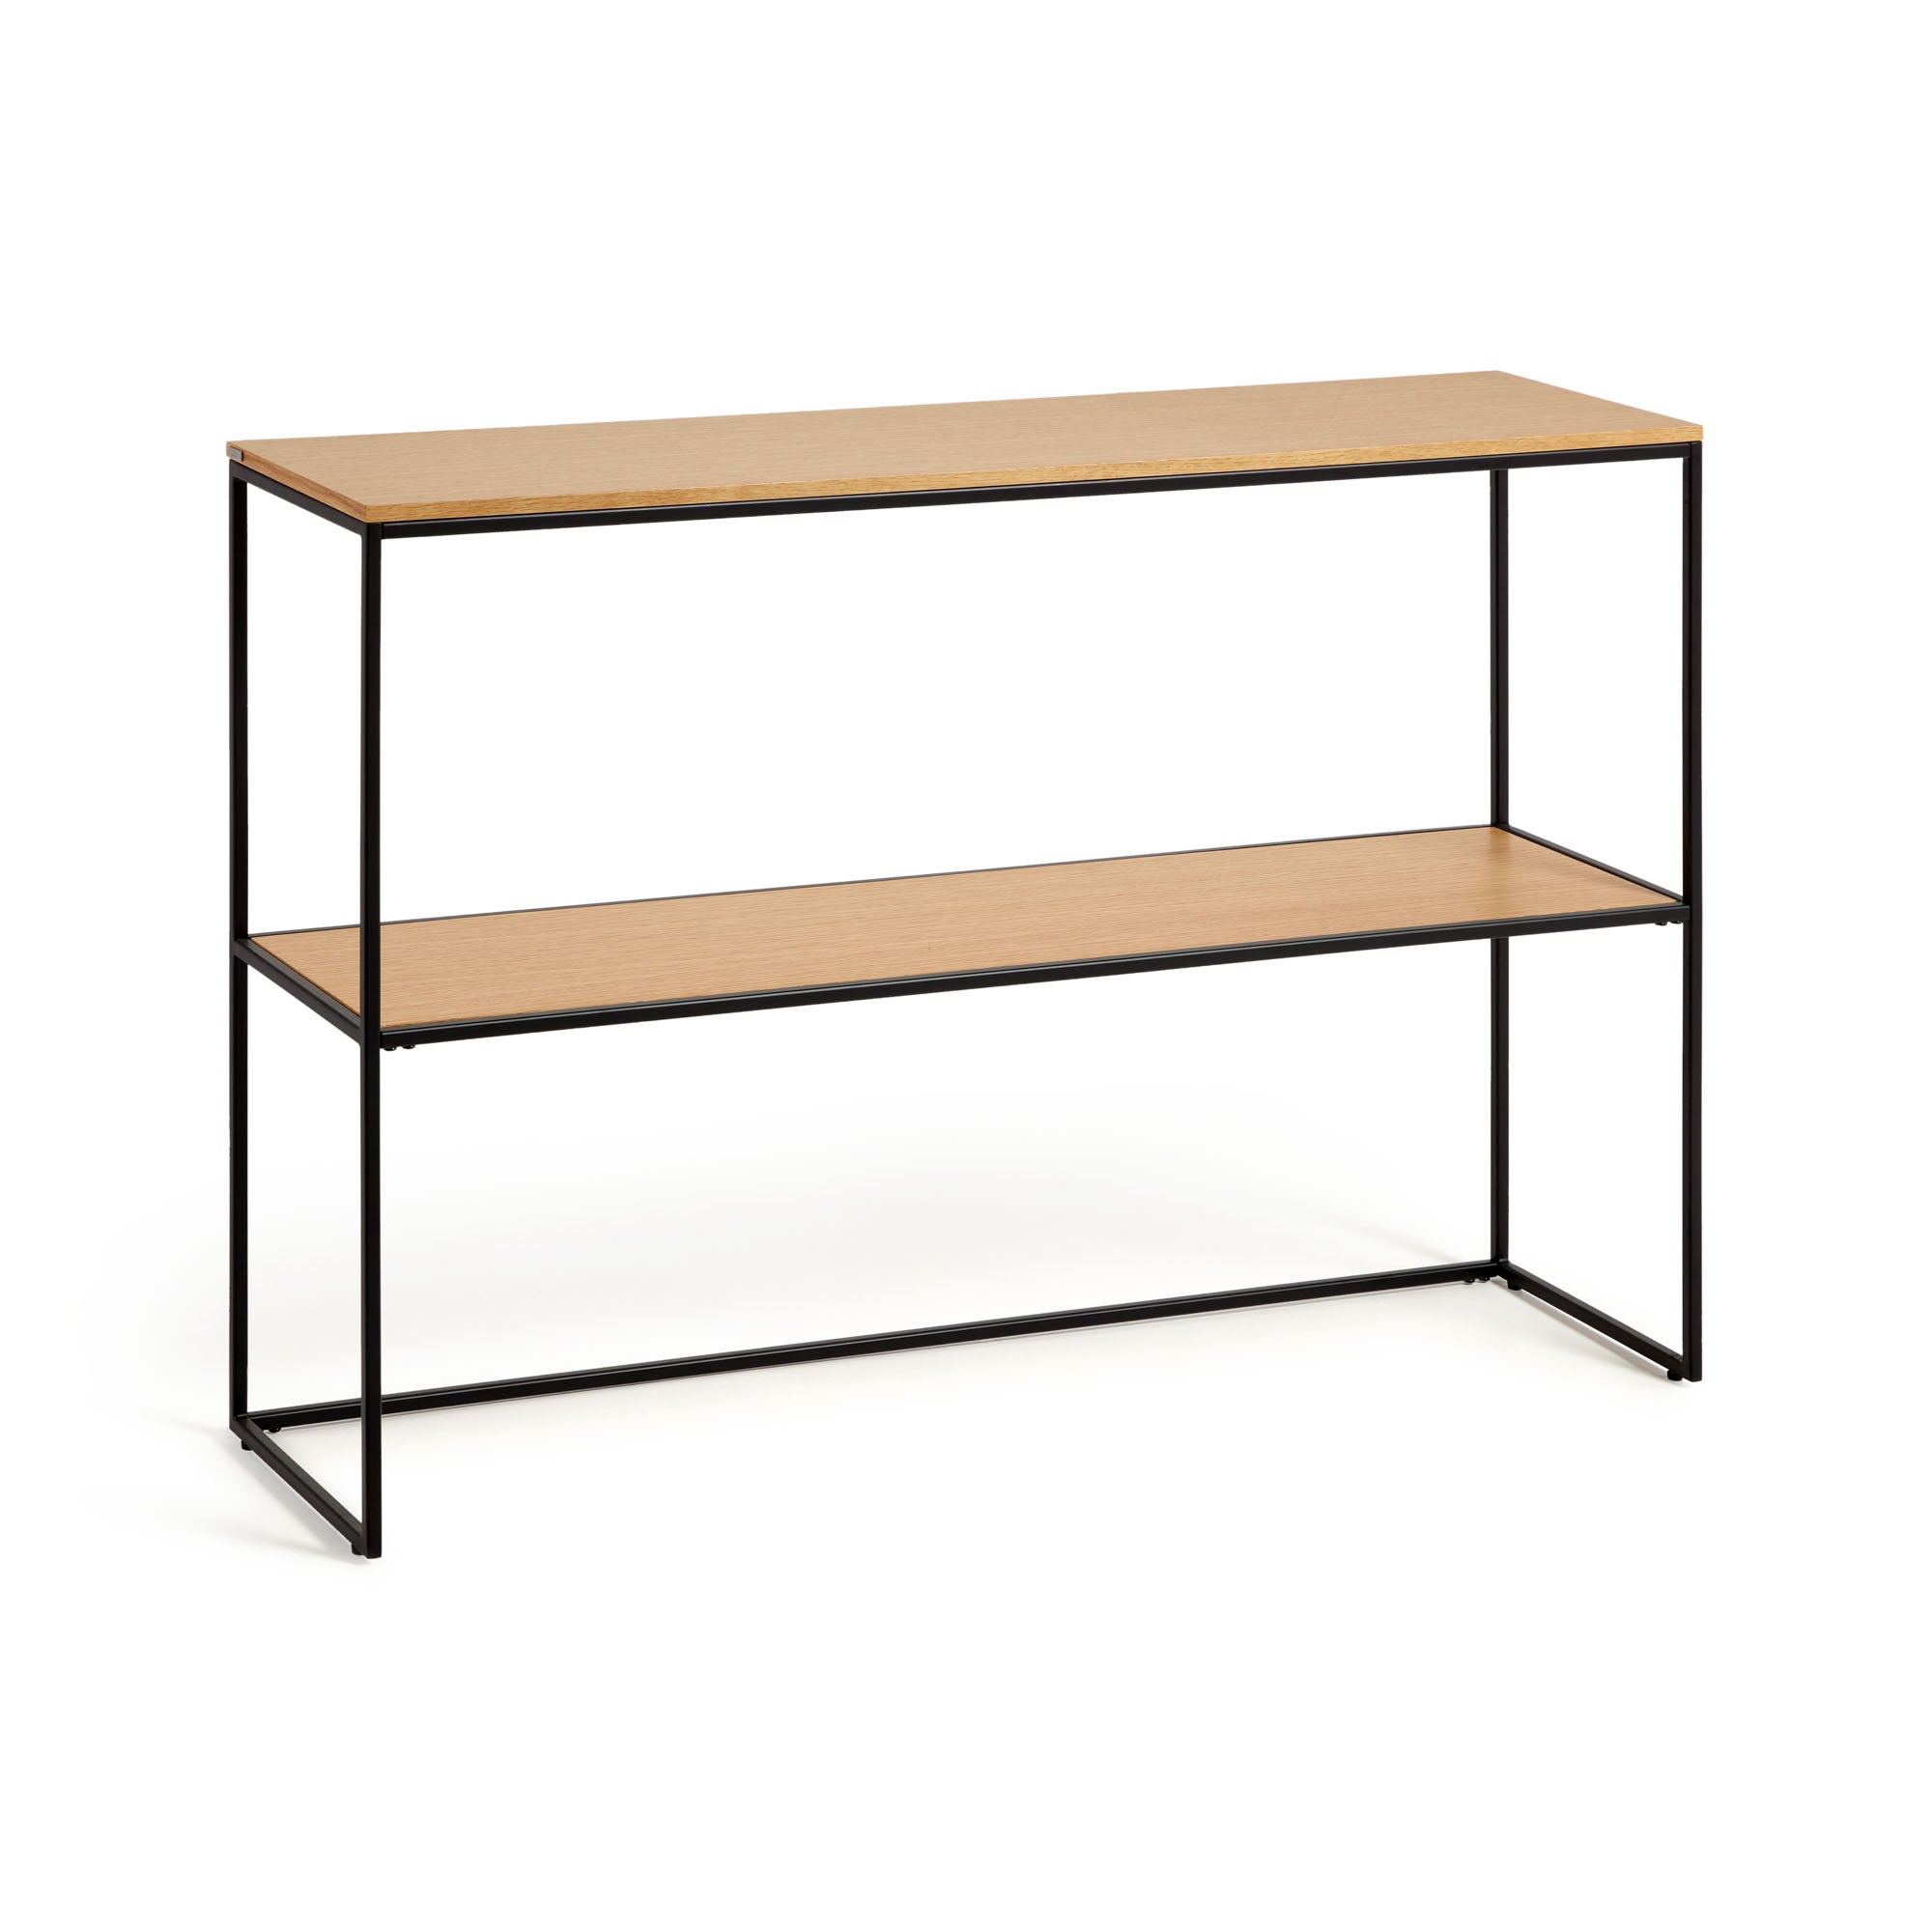 Yoana console table with oak wood veneer and painted black metal structure, 120 x 80 cm